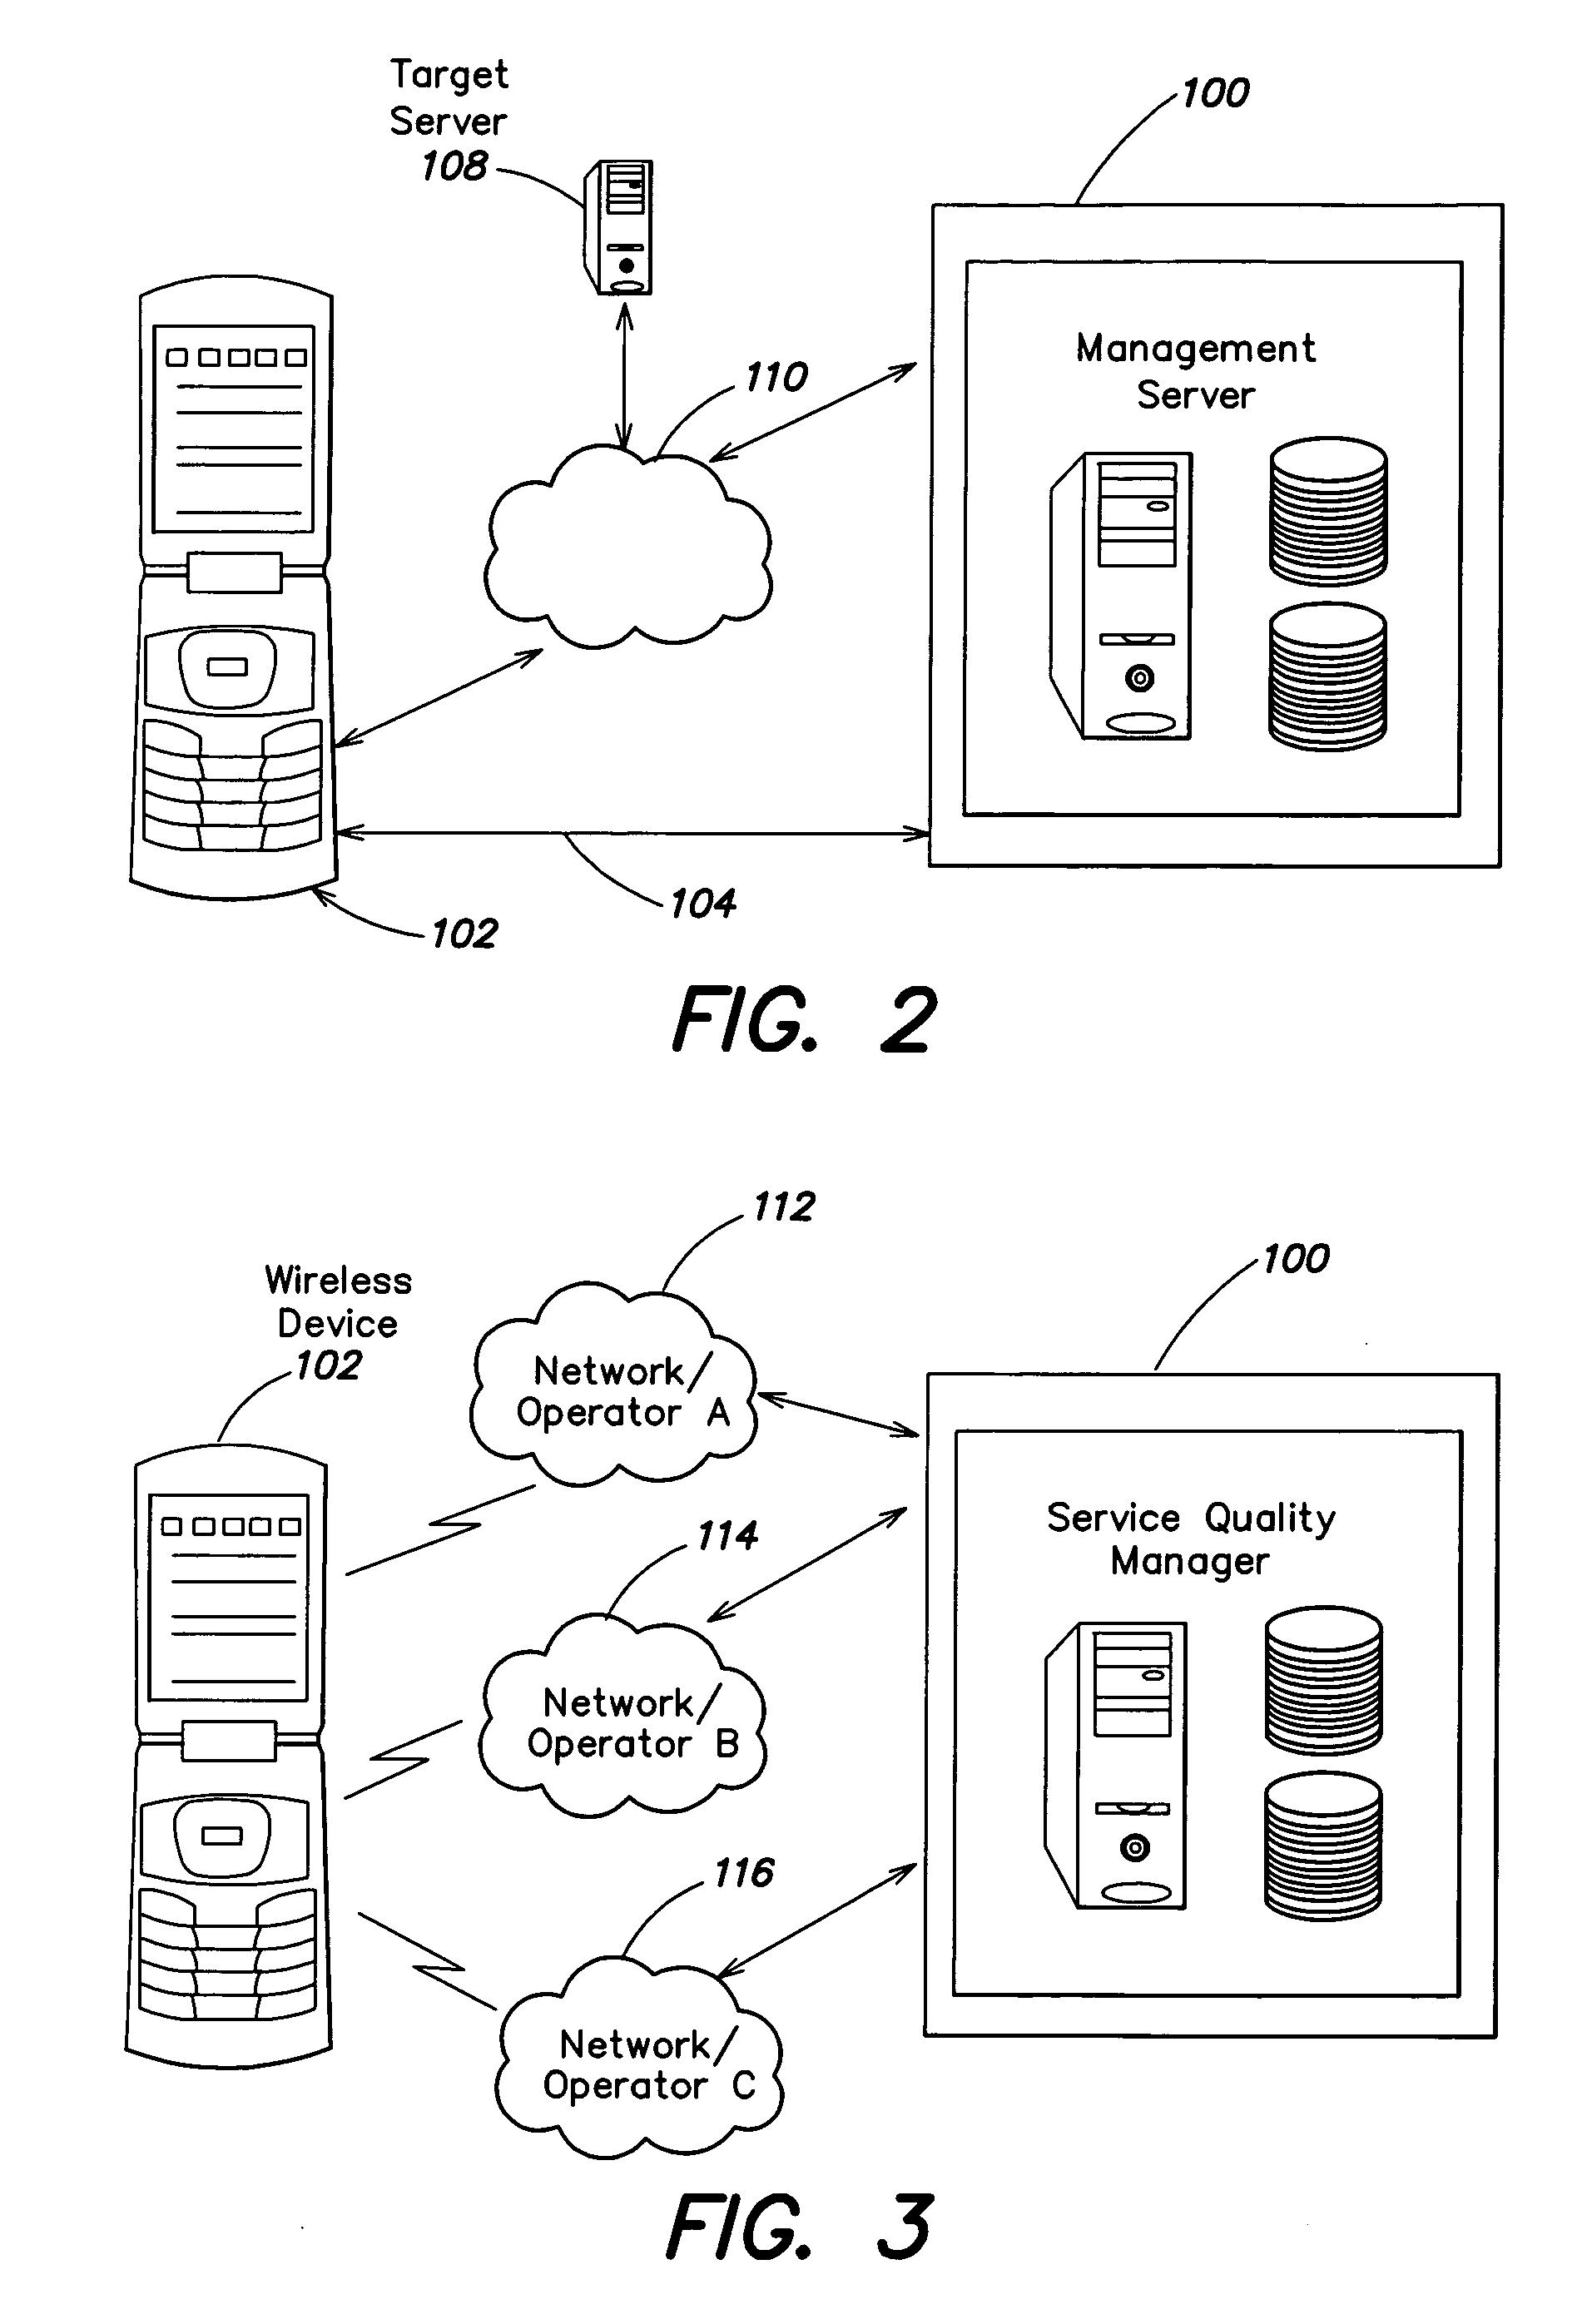 System and method for service quality management for wireless devices